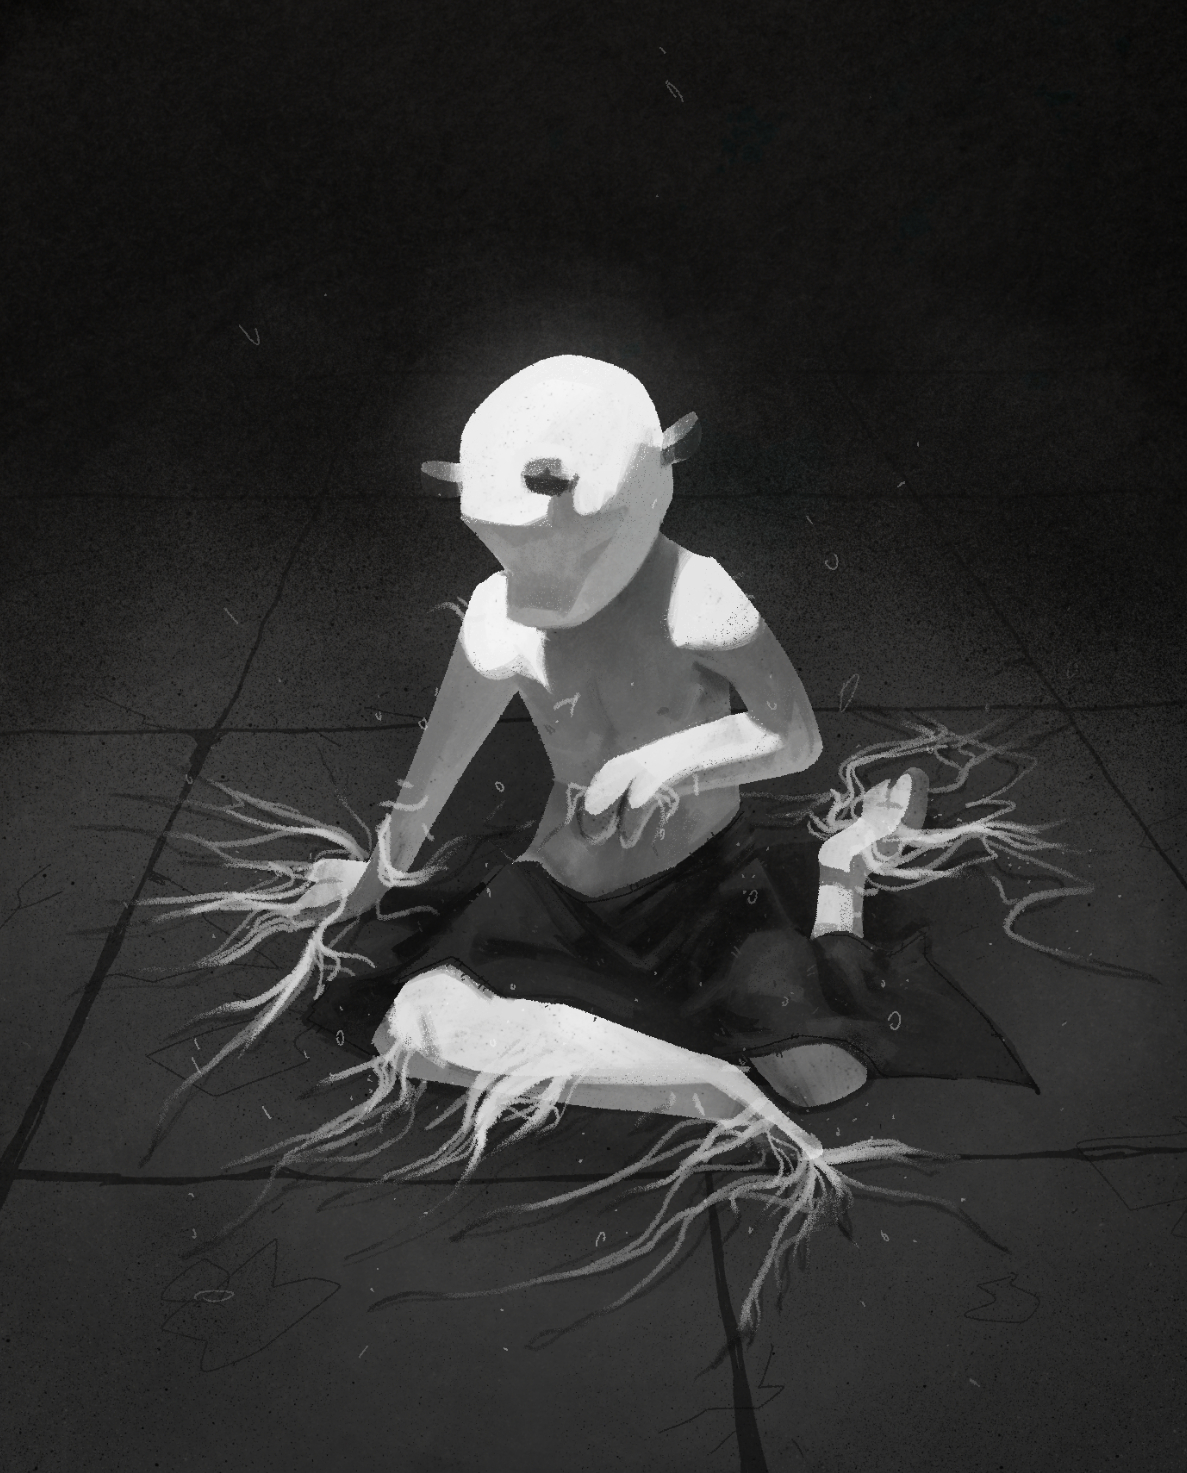 An illustration of a a strange, faceless mushroom-like creature. Their mycelium flows from their hands and limbs onto the floor. Dust floats in the air.